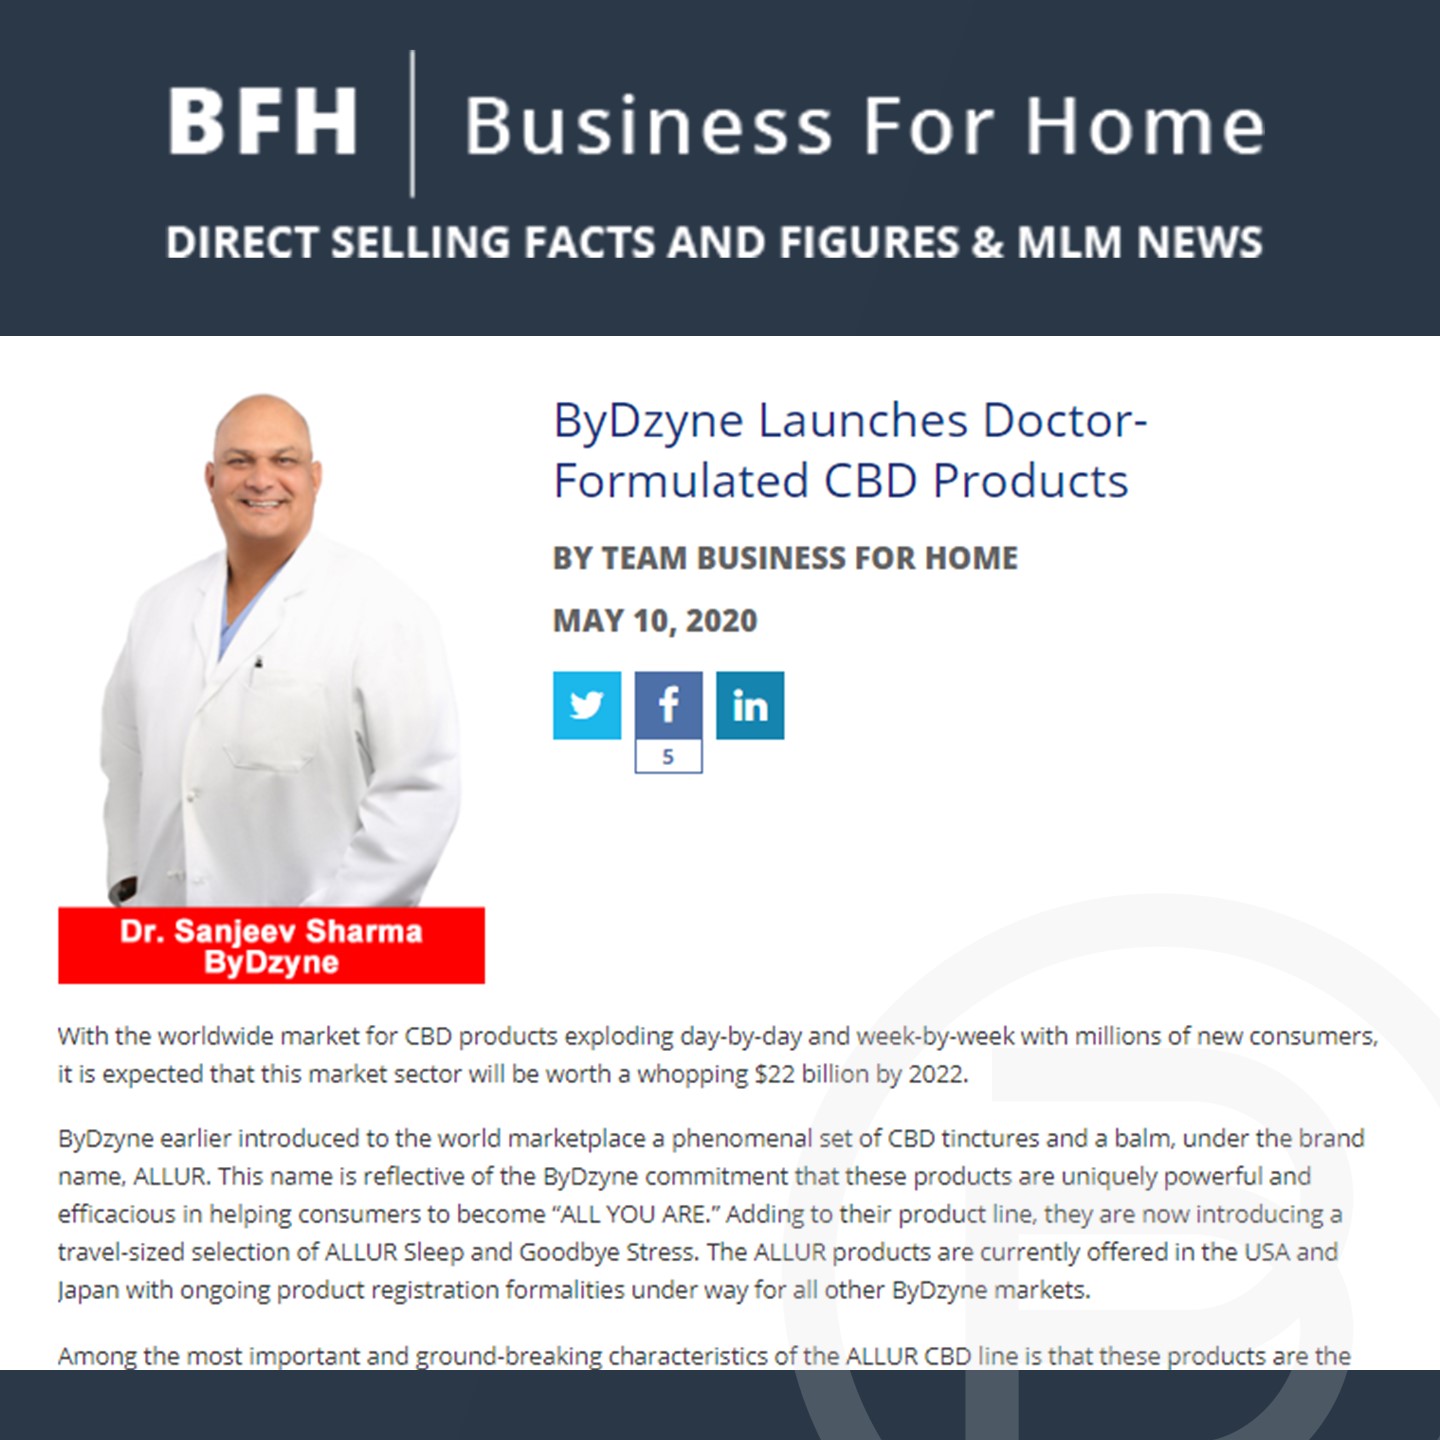 BFH: ByDzyne Launches Doctor-Formulated CBD Products